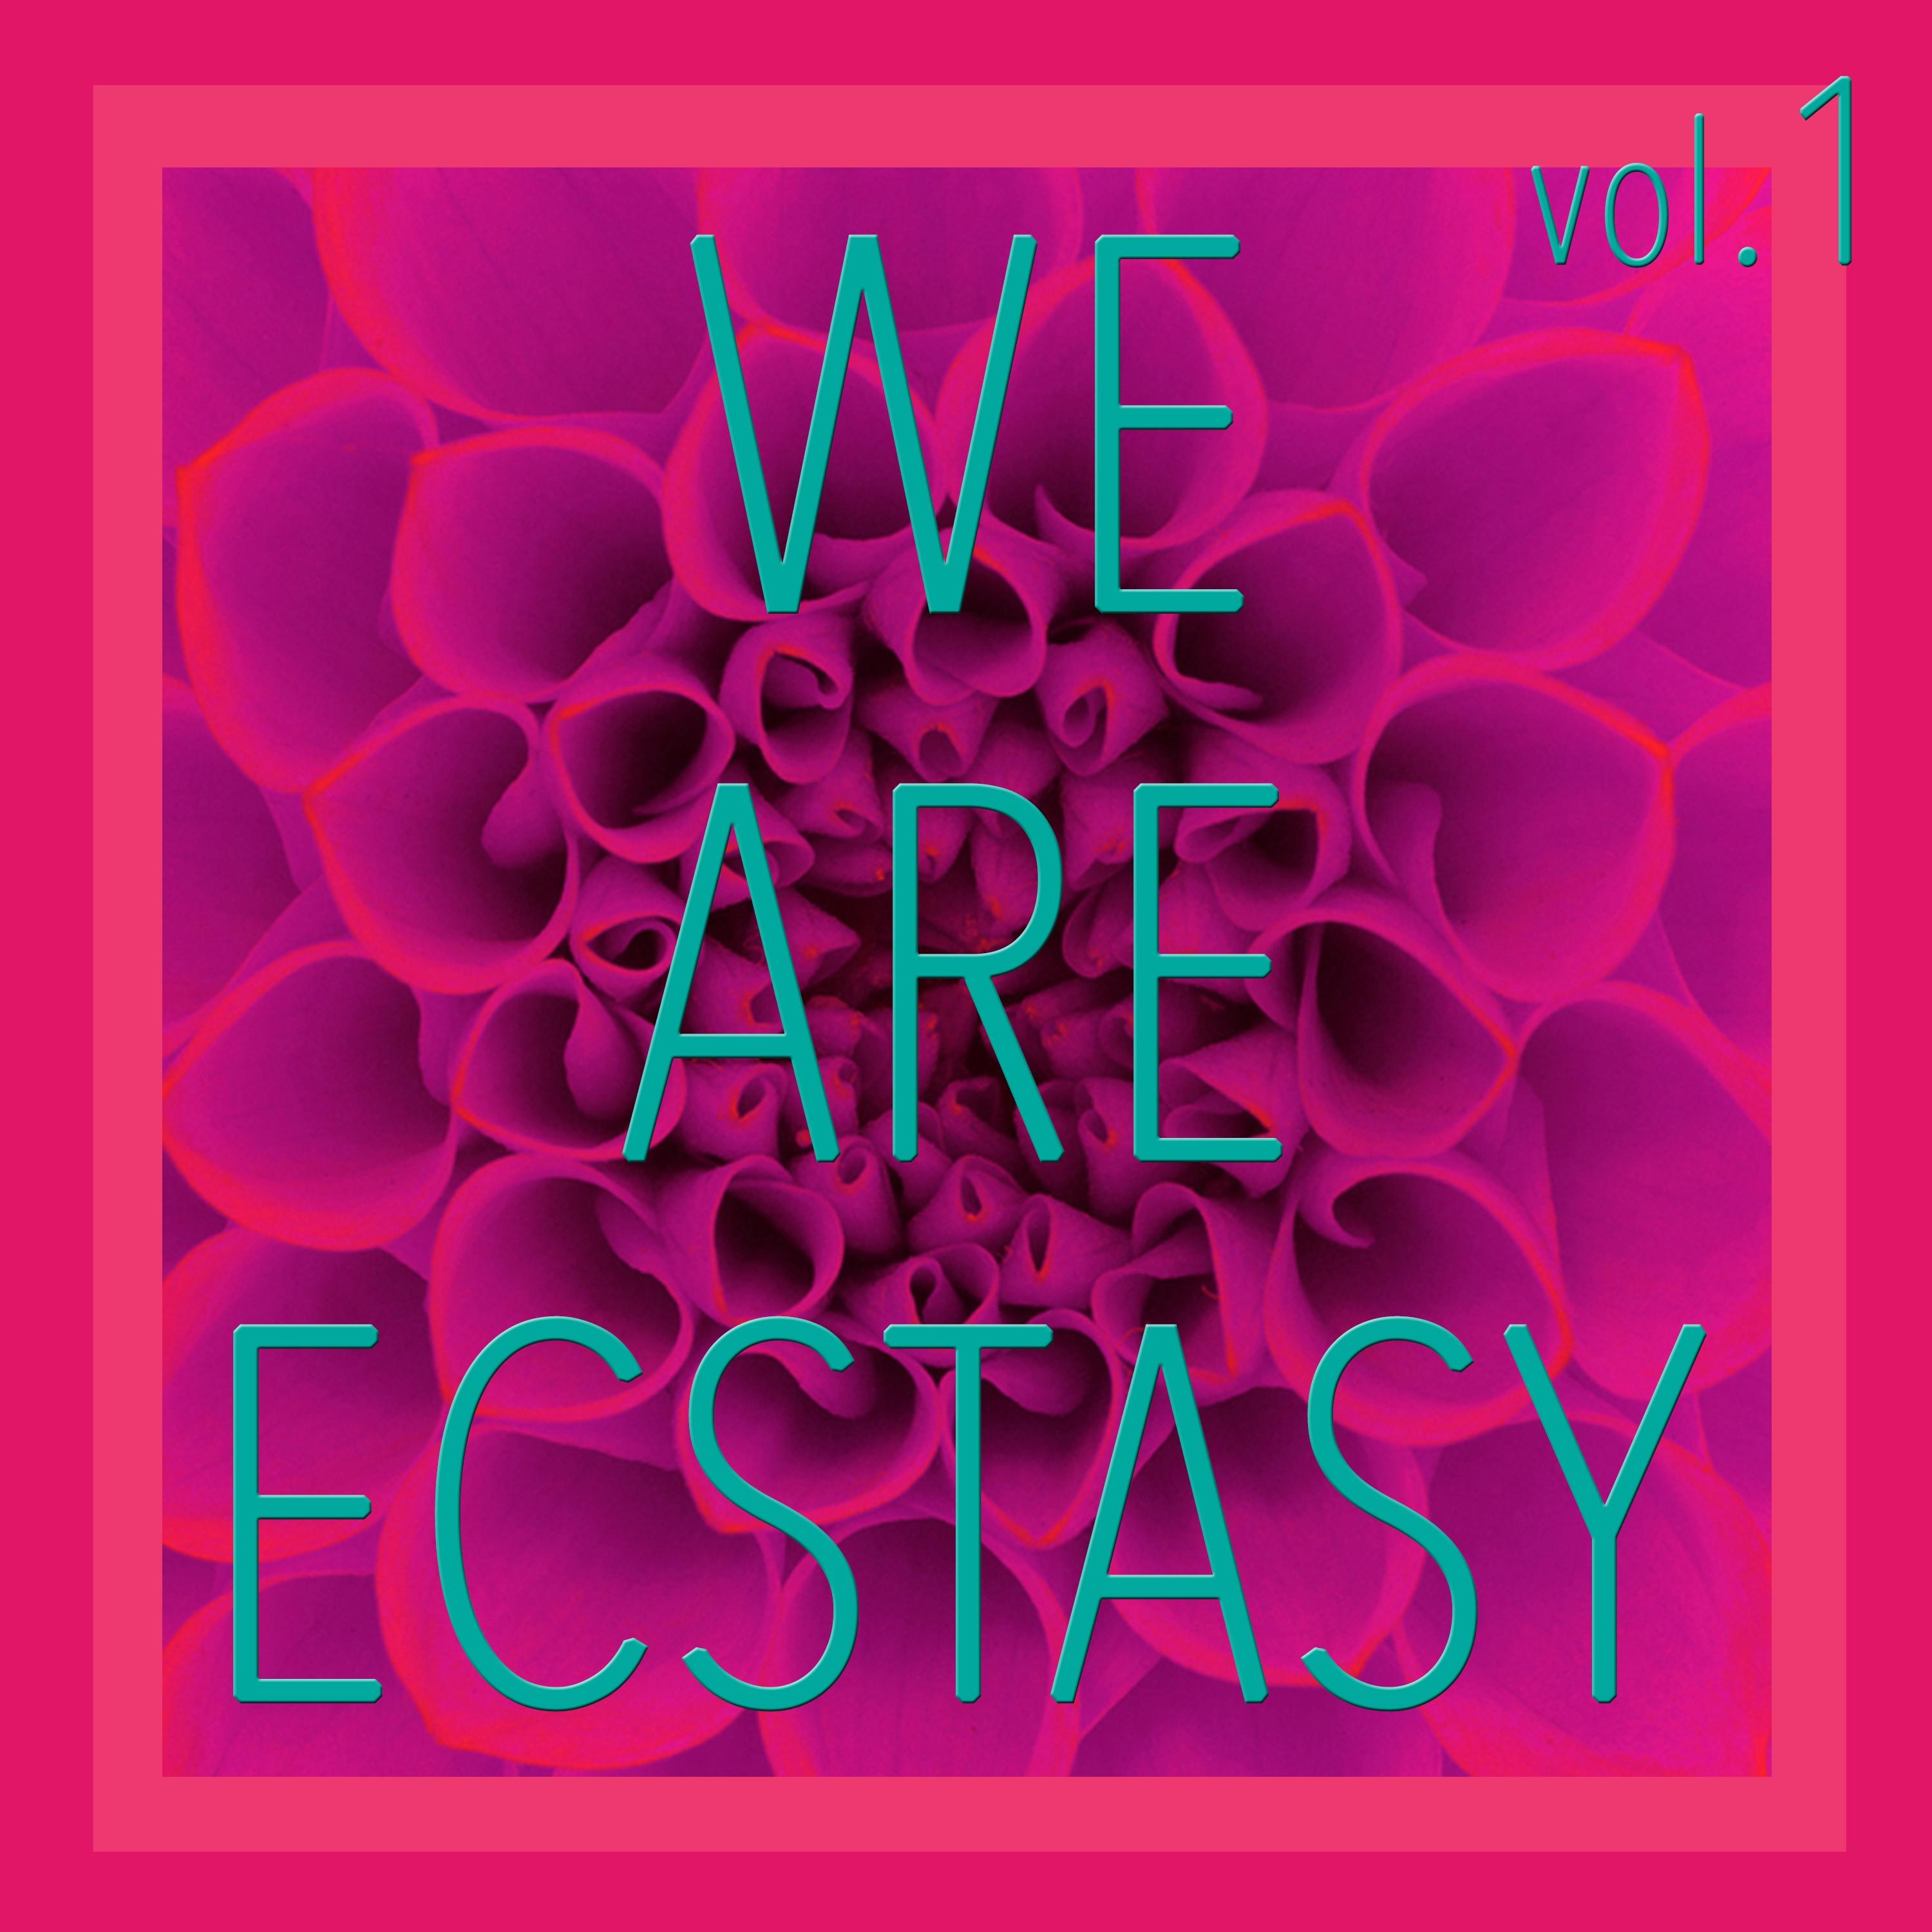 We Are Ecstasy, Vol. 1 - Selection of House and Tech House